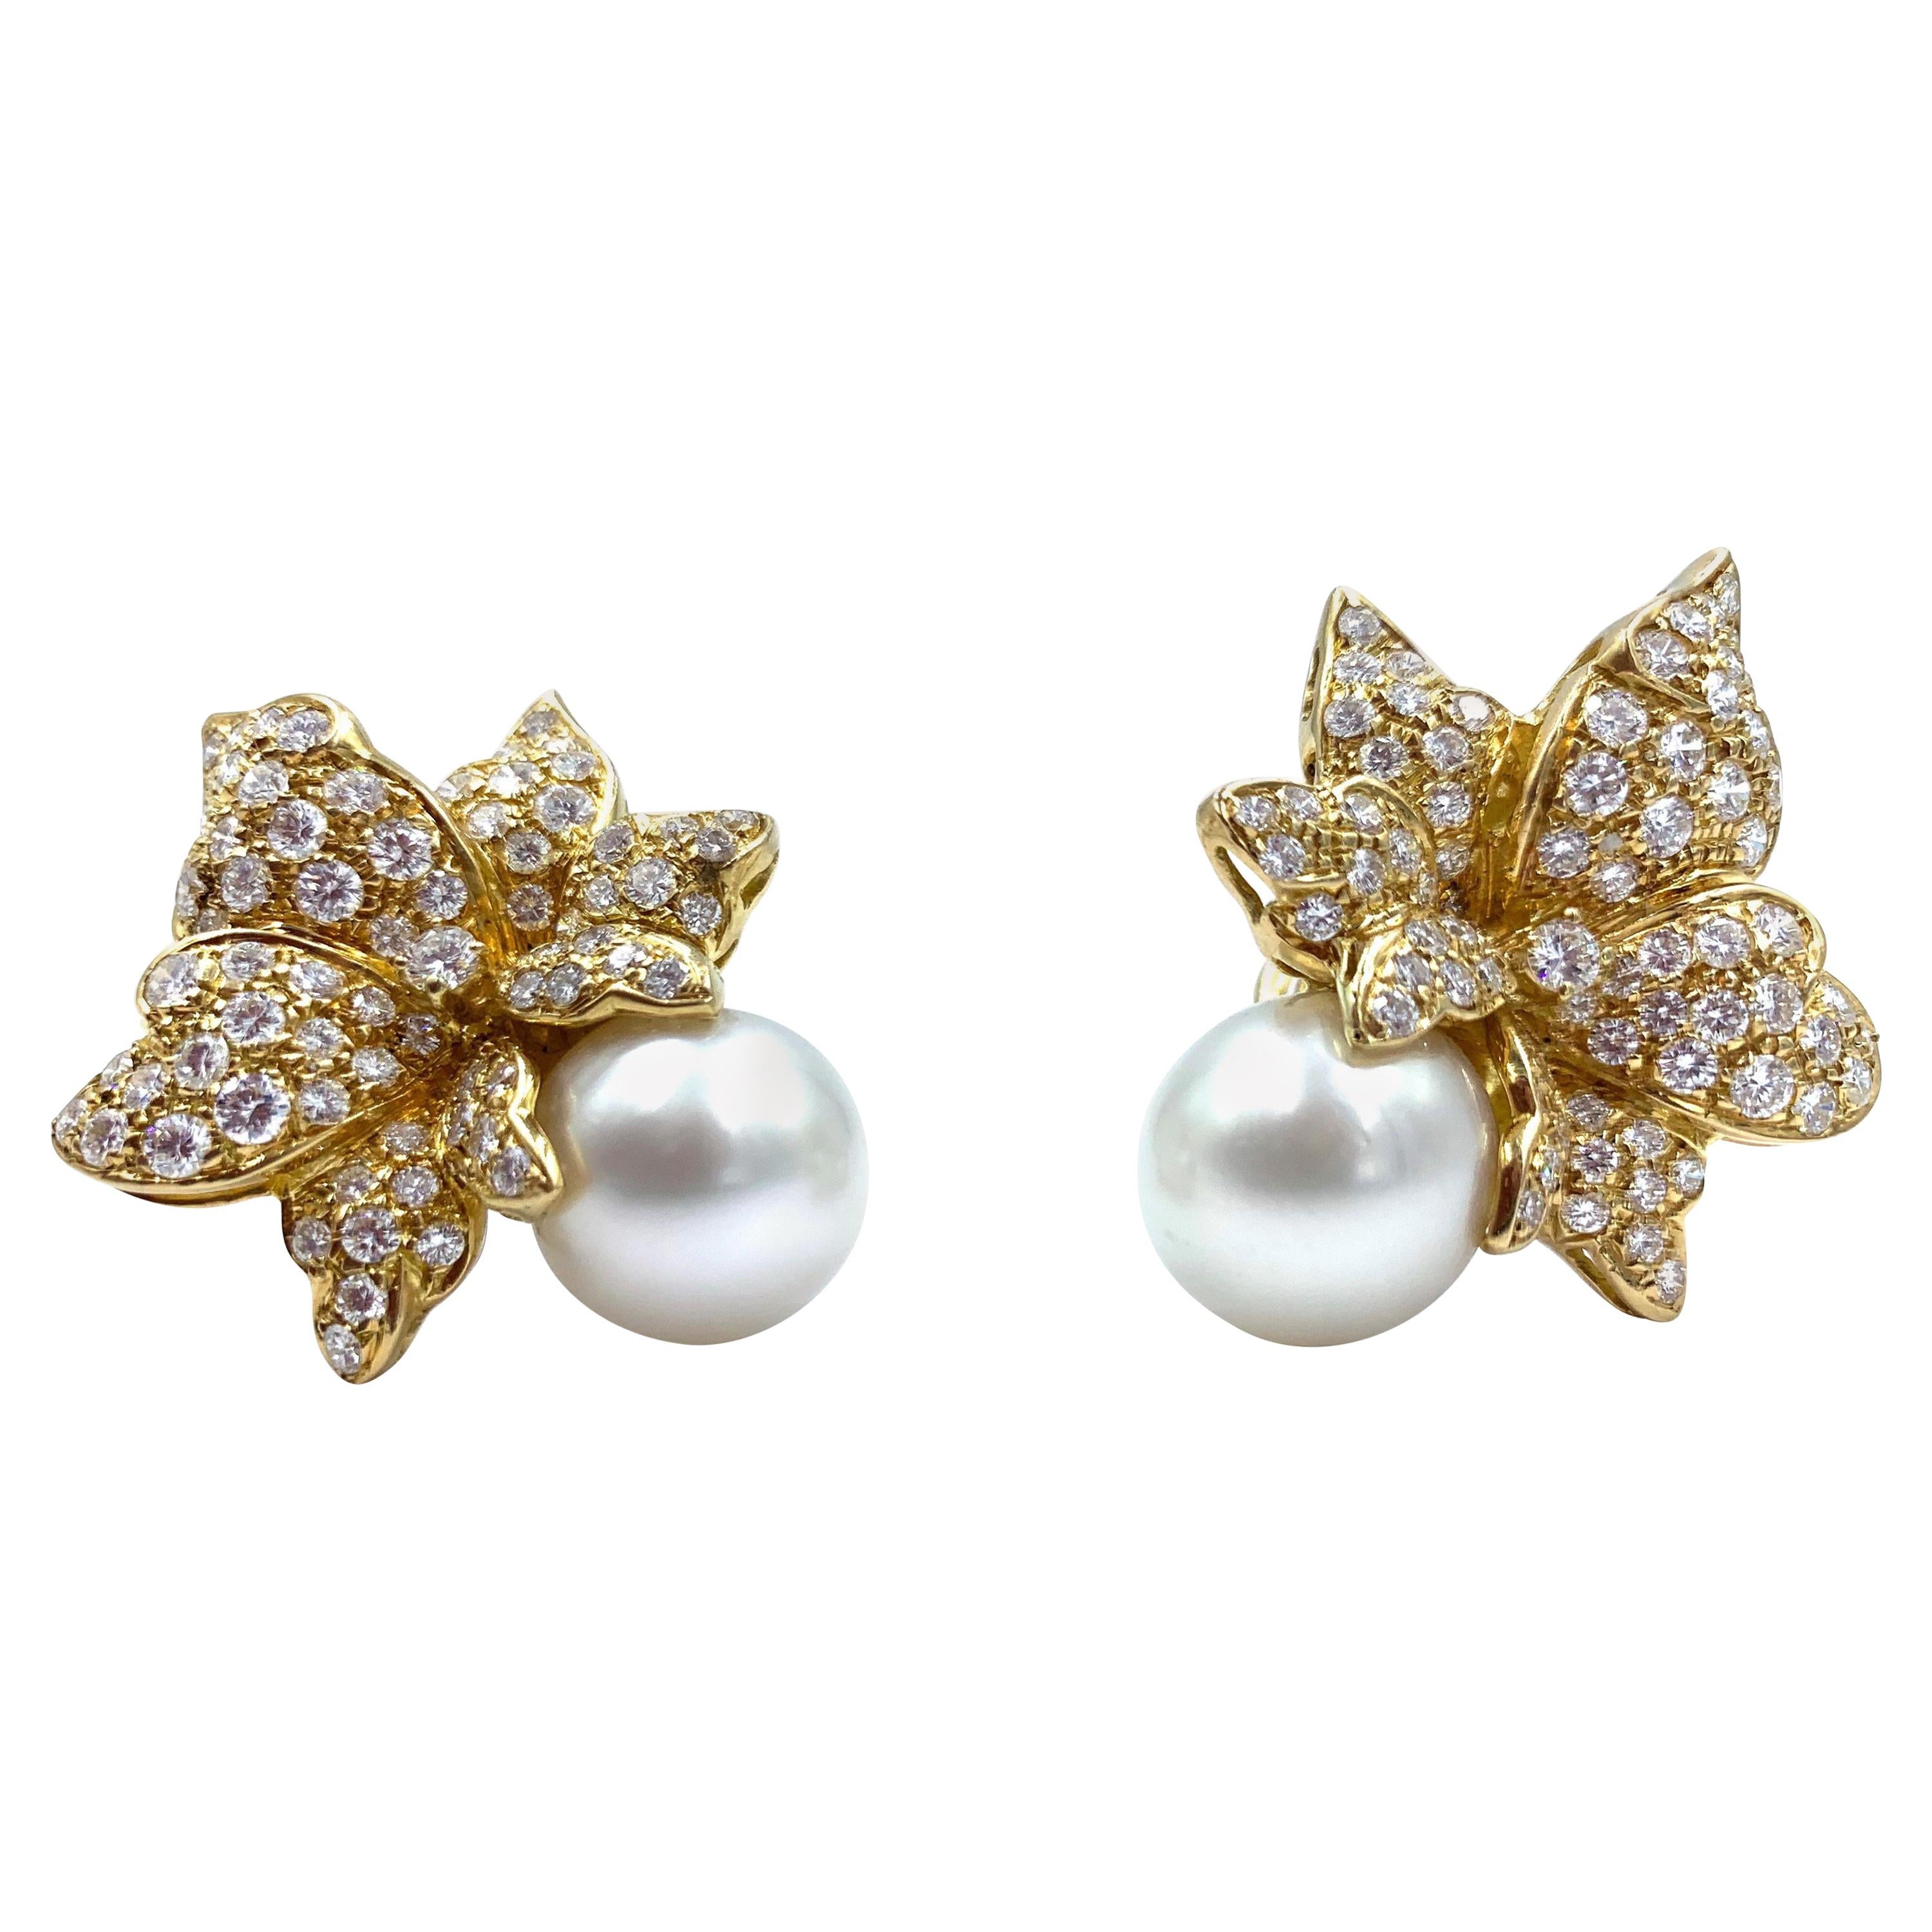 18 Karat Gold and Diamond Flower Shaped Earrings with Huge South Sea Pearl